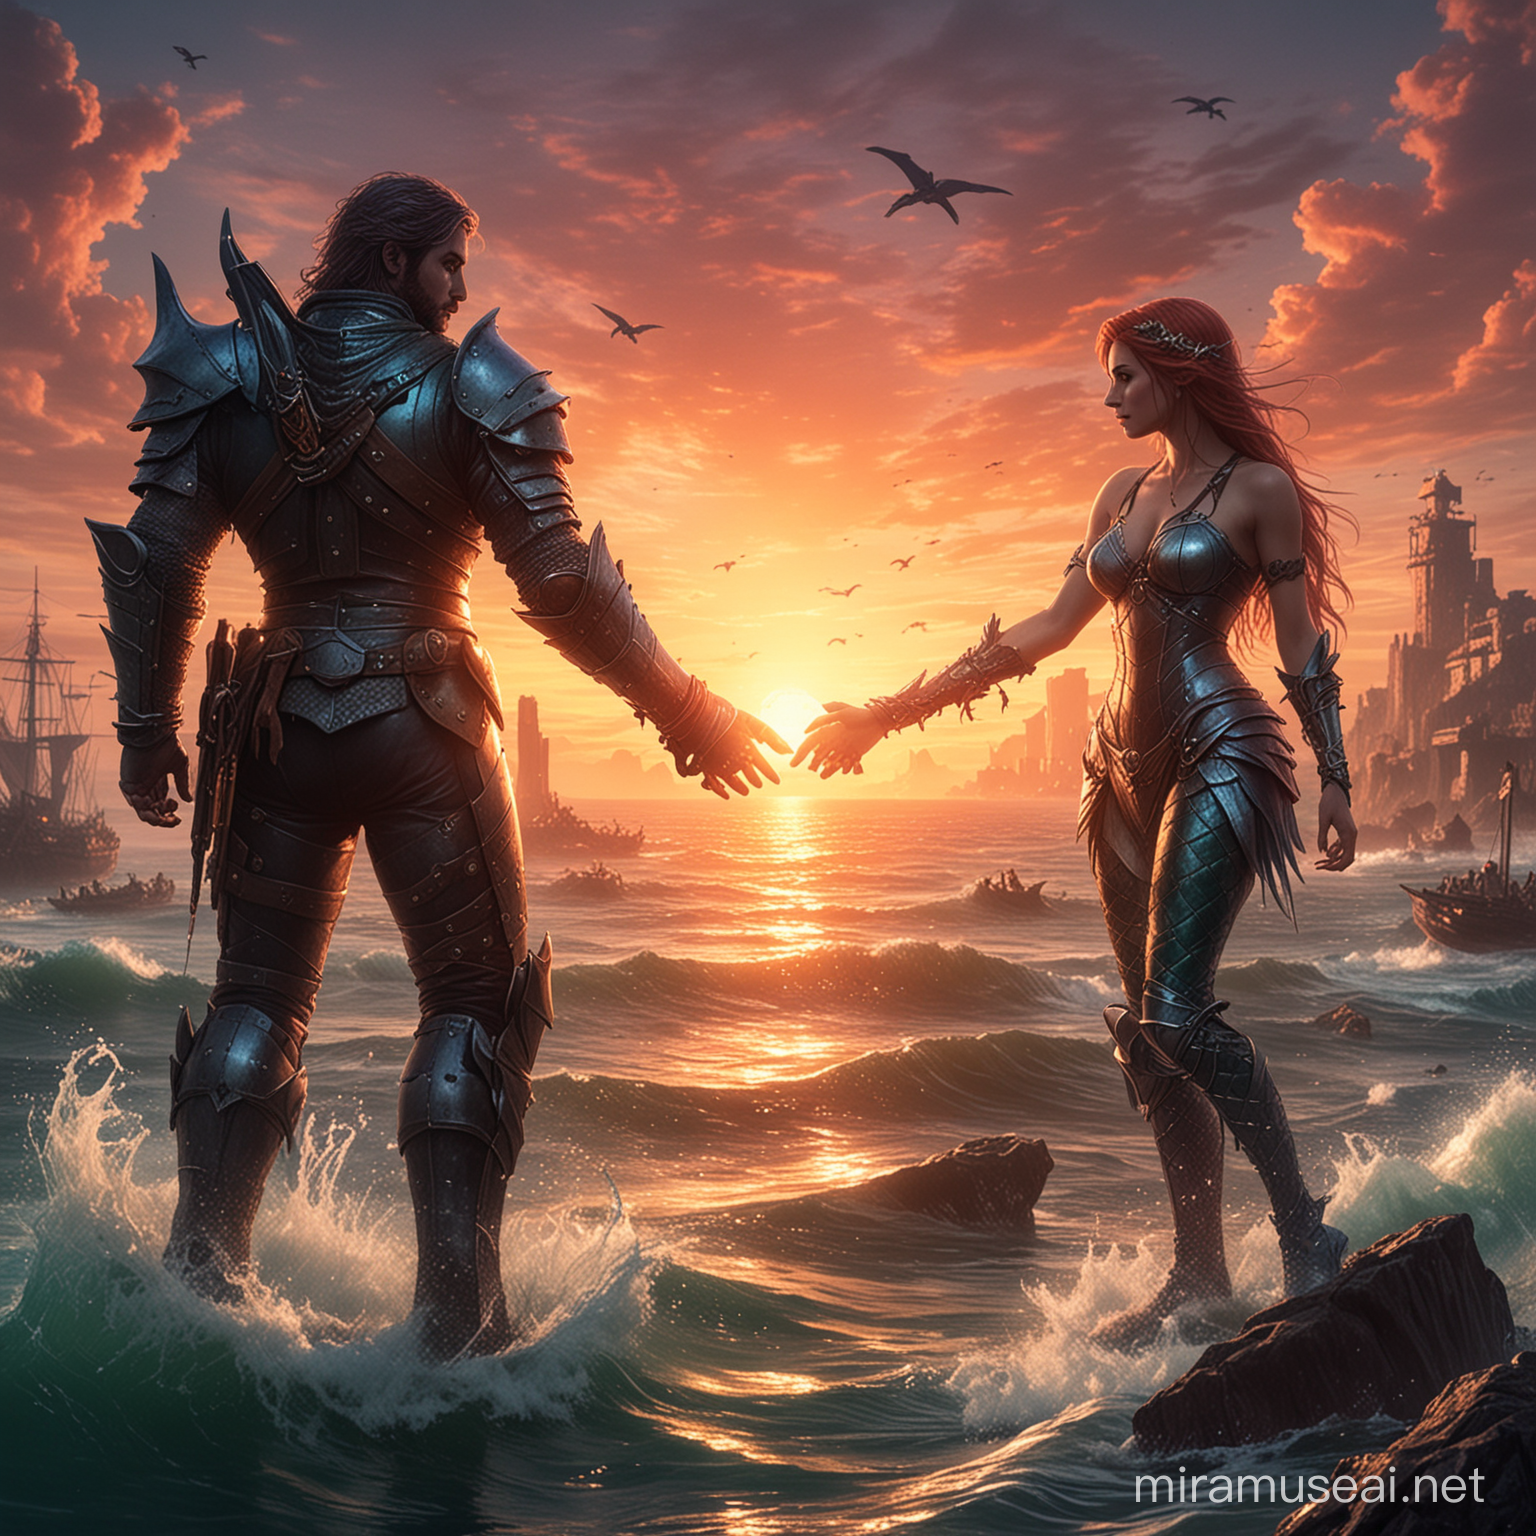 A mermaid and a video game knight, they are holding hands, they are taking in an apocalyptic sunset